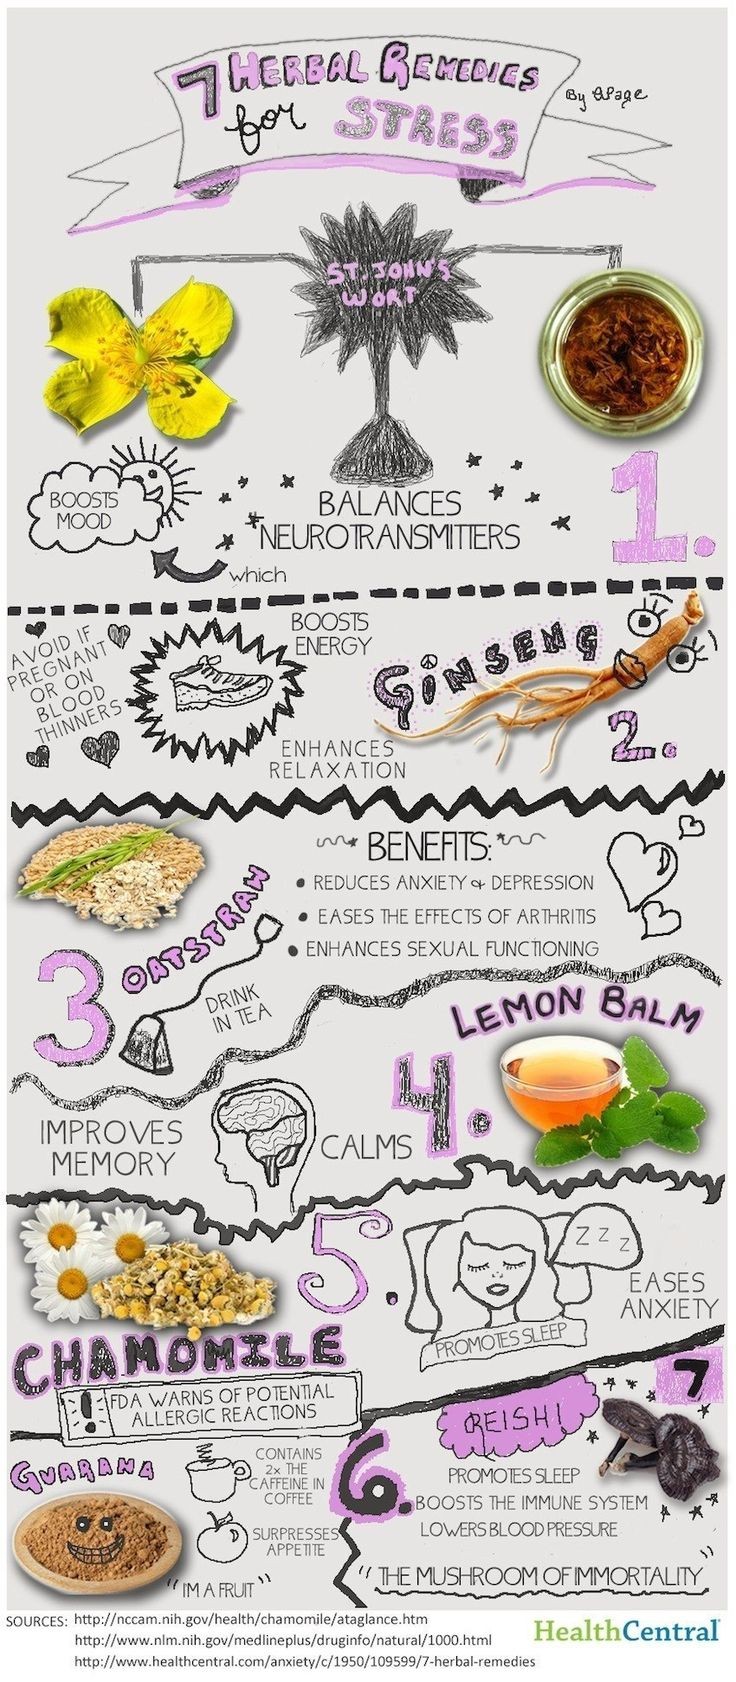 7 Herbal Remedies For Stress Infographic!  Who cou...